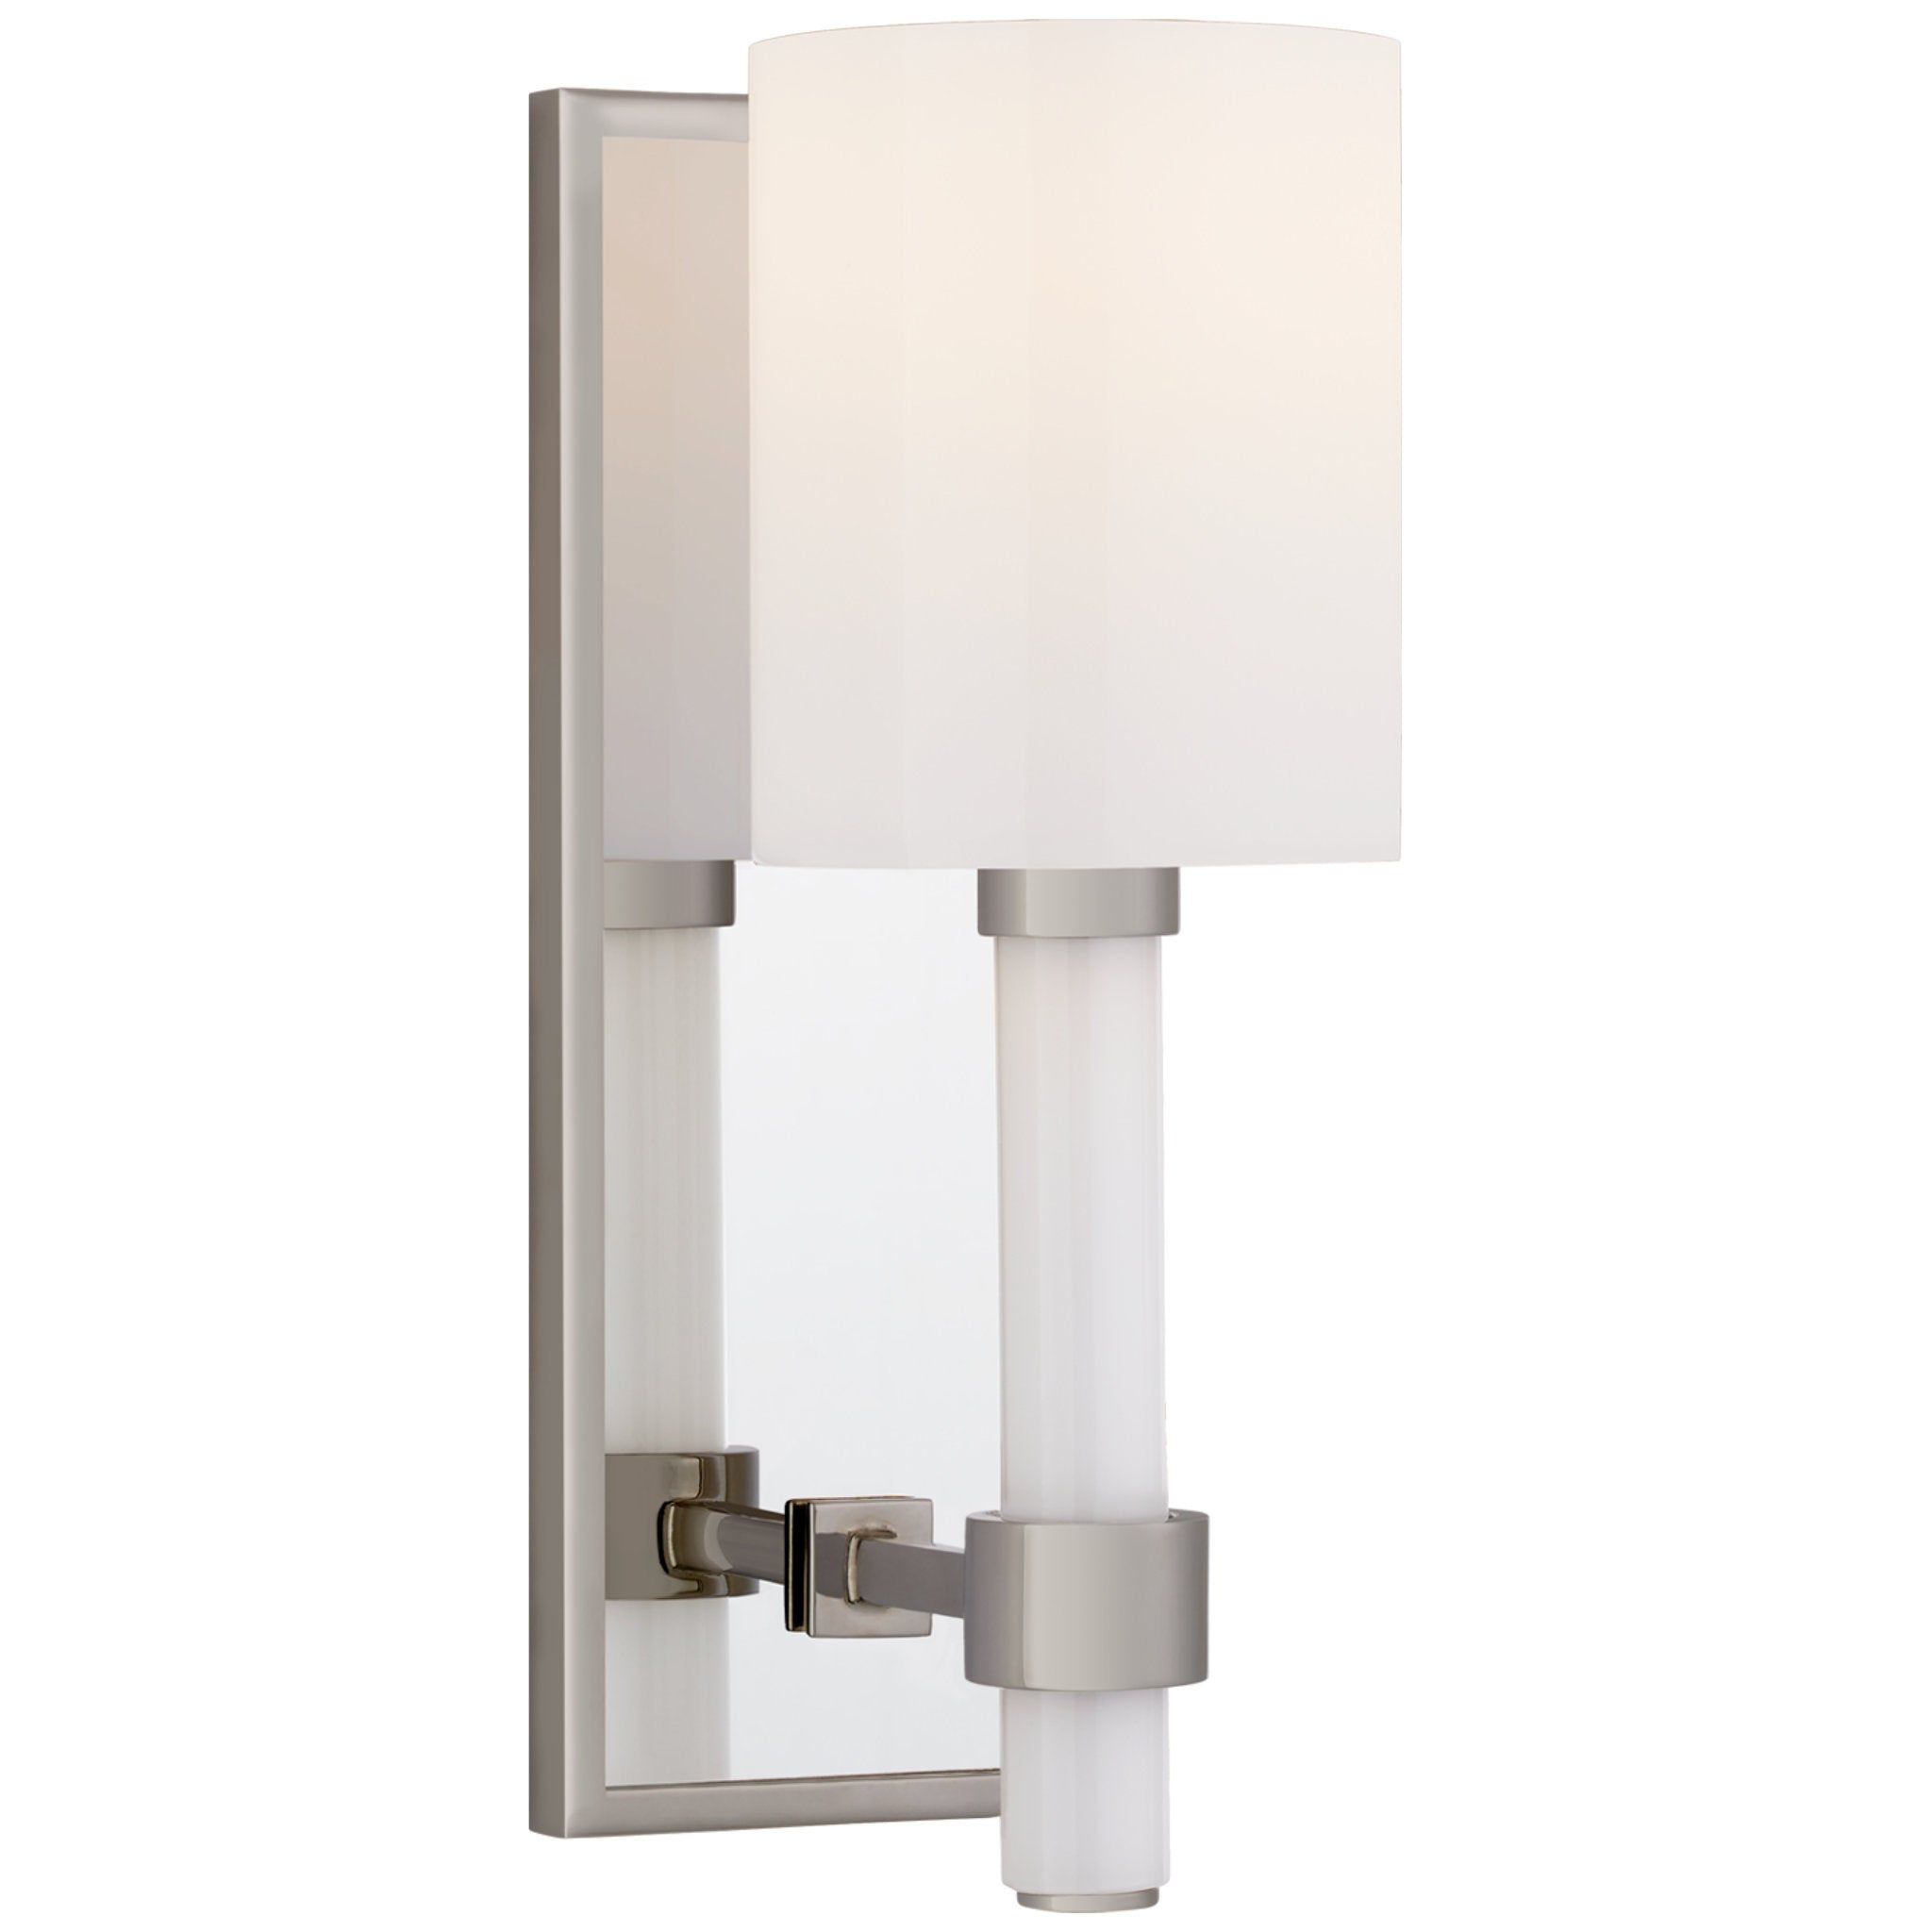 Suzanne Kasler Maribelle Single Sconce in Polished Nickel with White Glass